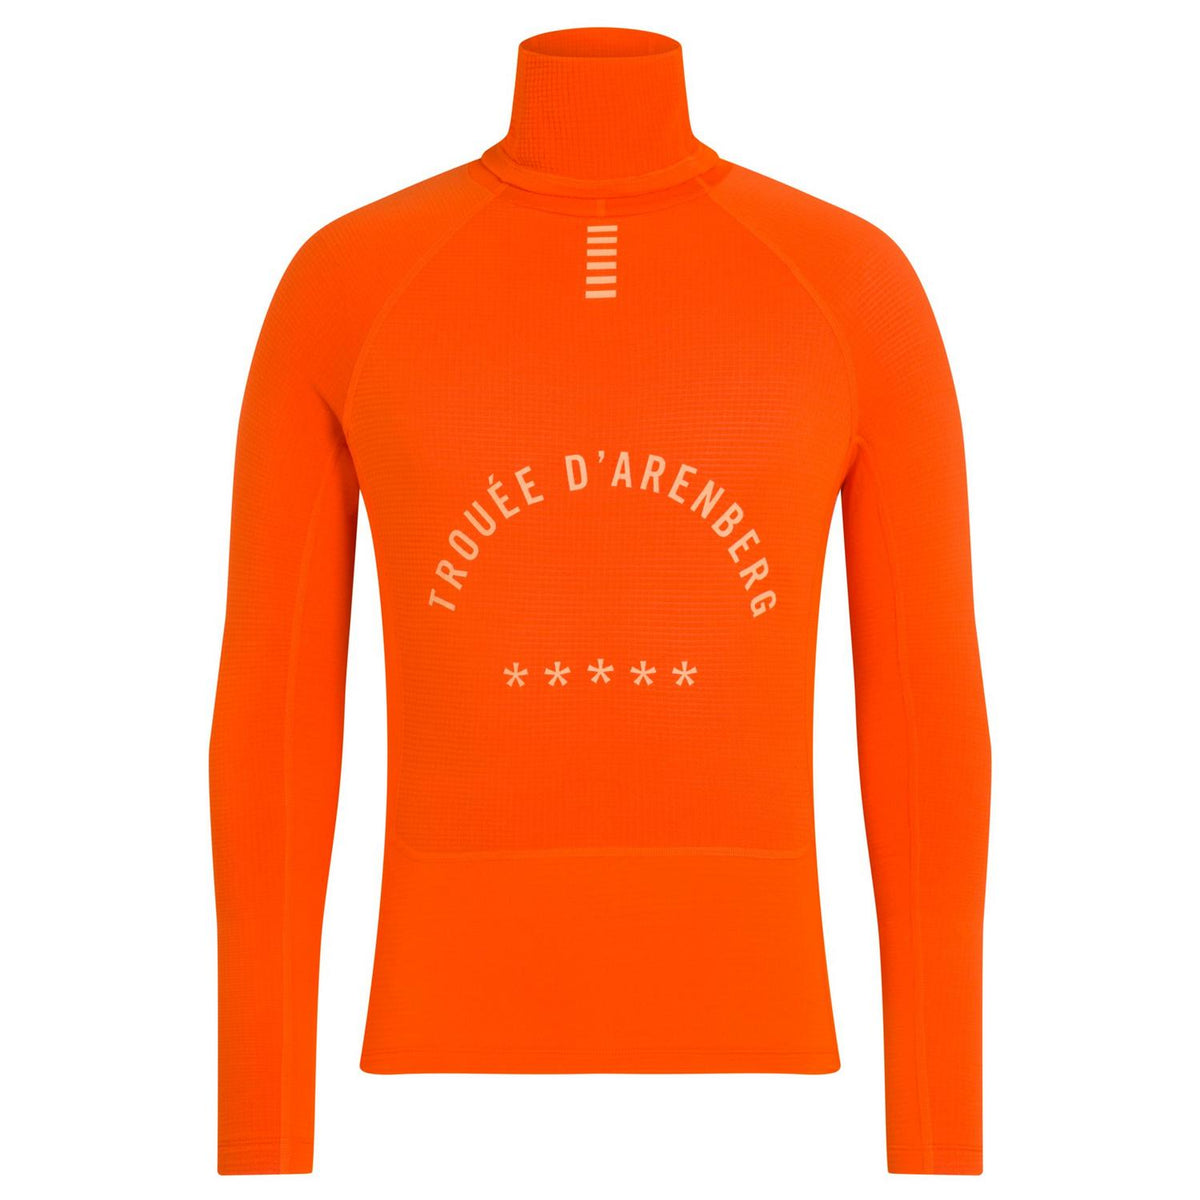 Rapha Men's Pro Team Thermal Base Layer – Long Sleeve review